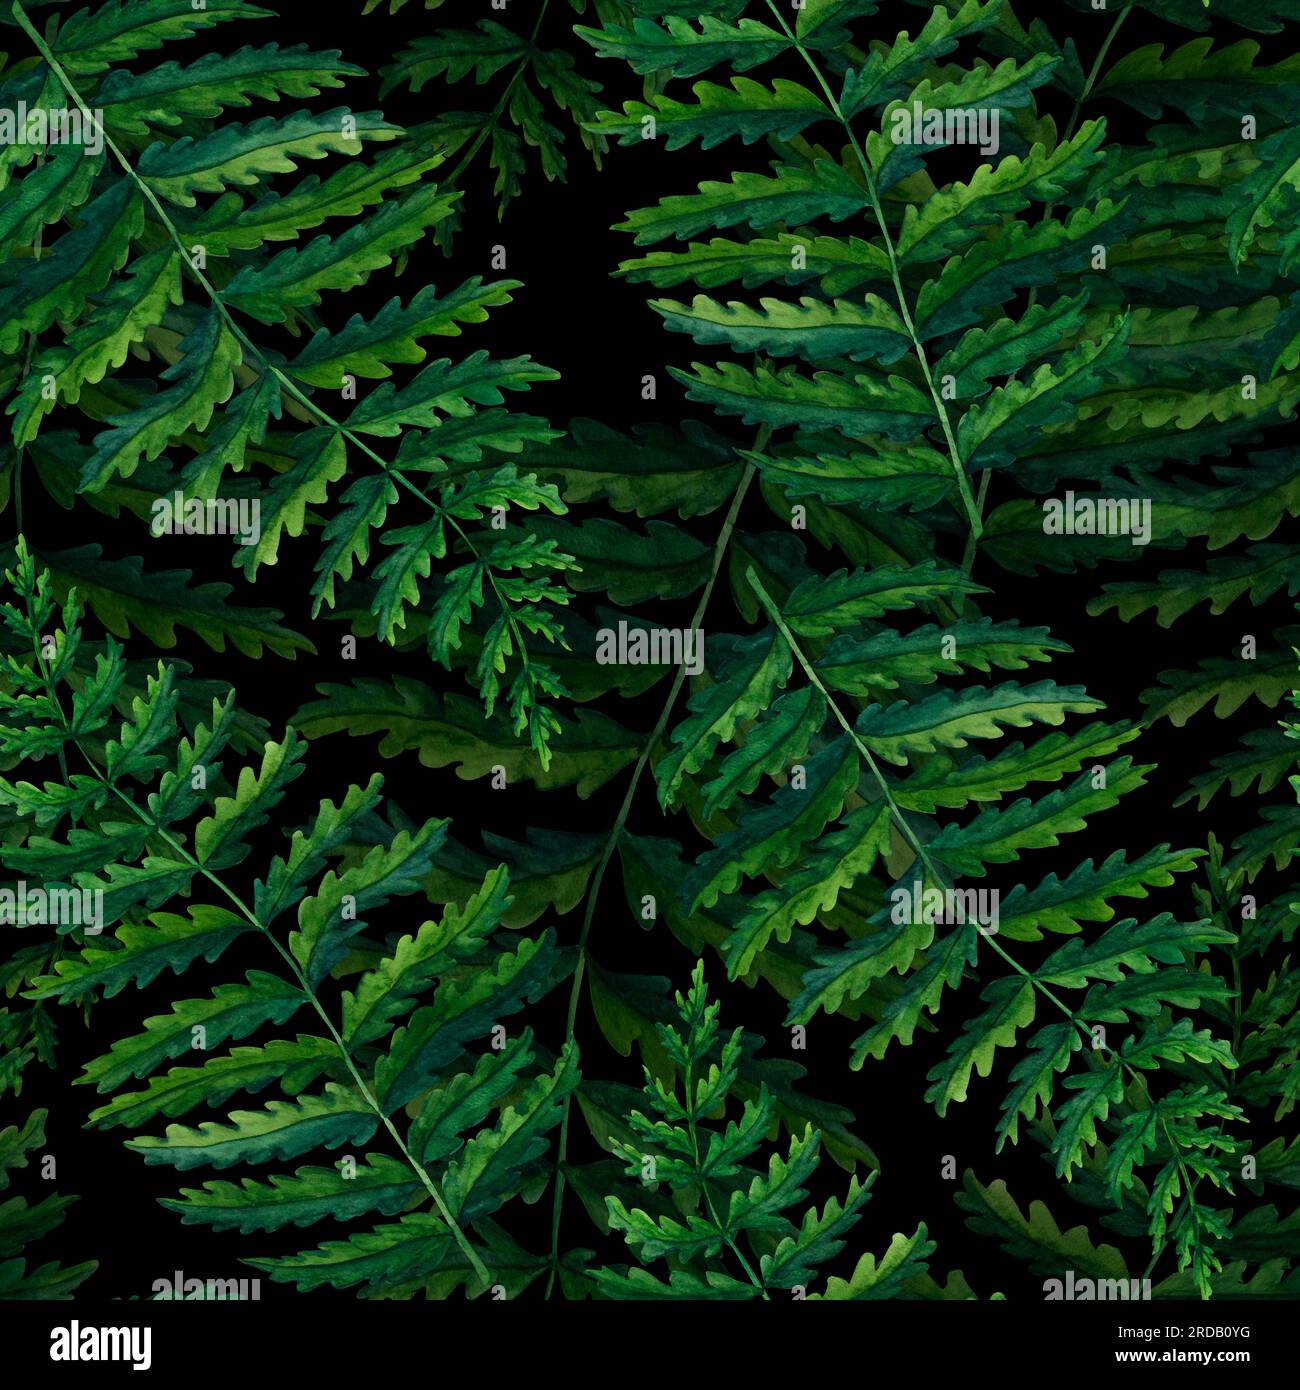 Seamless pattern fern watercolor hand painted illustration in green colors, greenery branch, twig, stem, forest plant isolated on black background for Stock Photo